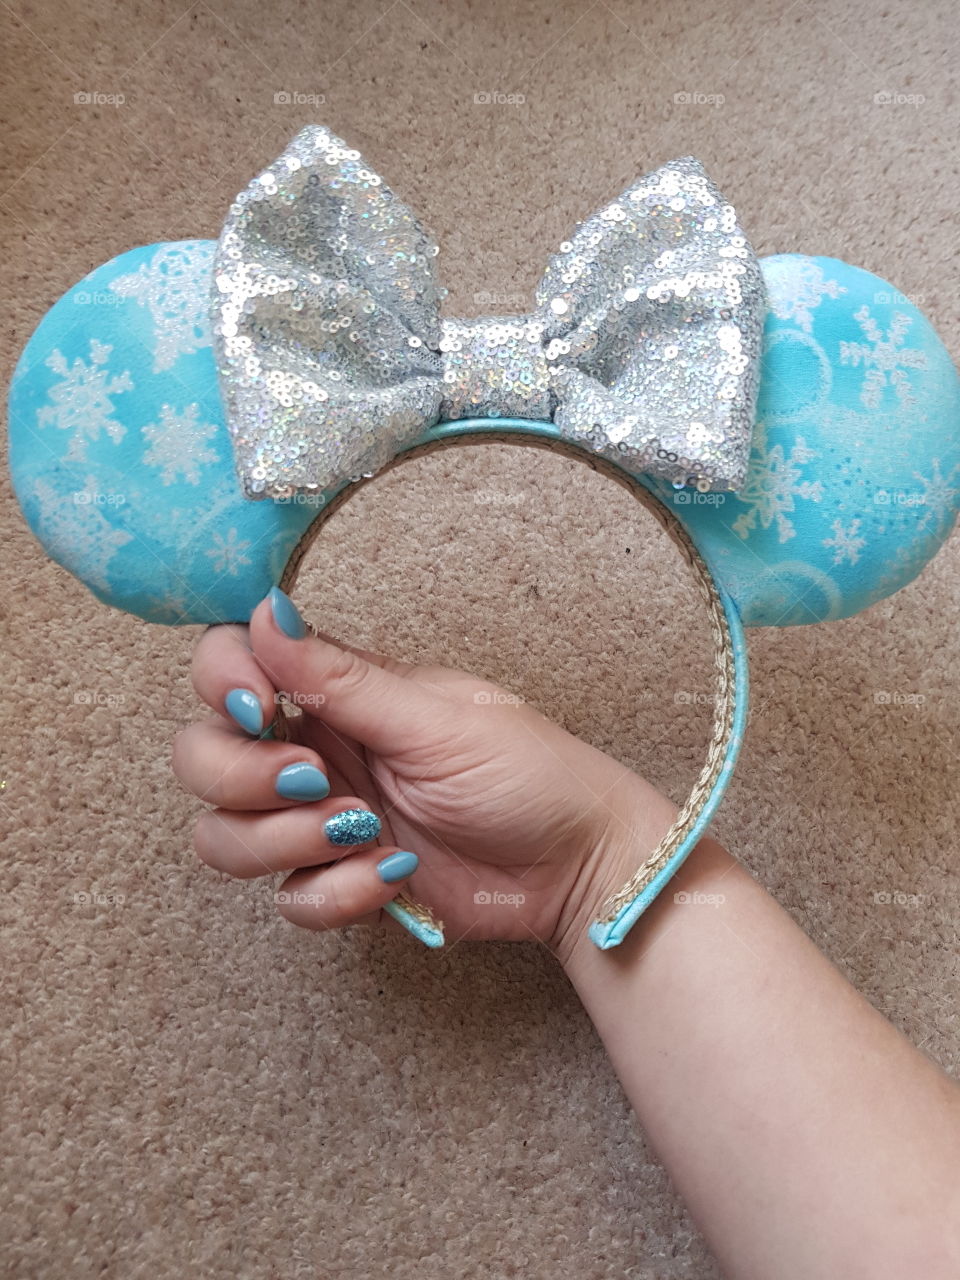 matching ears and nails